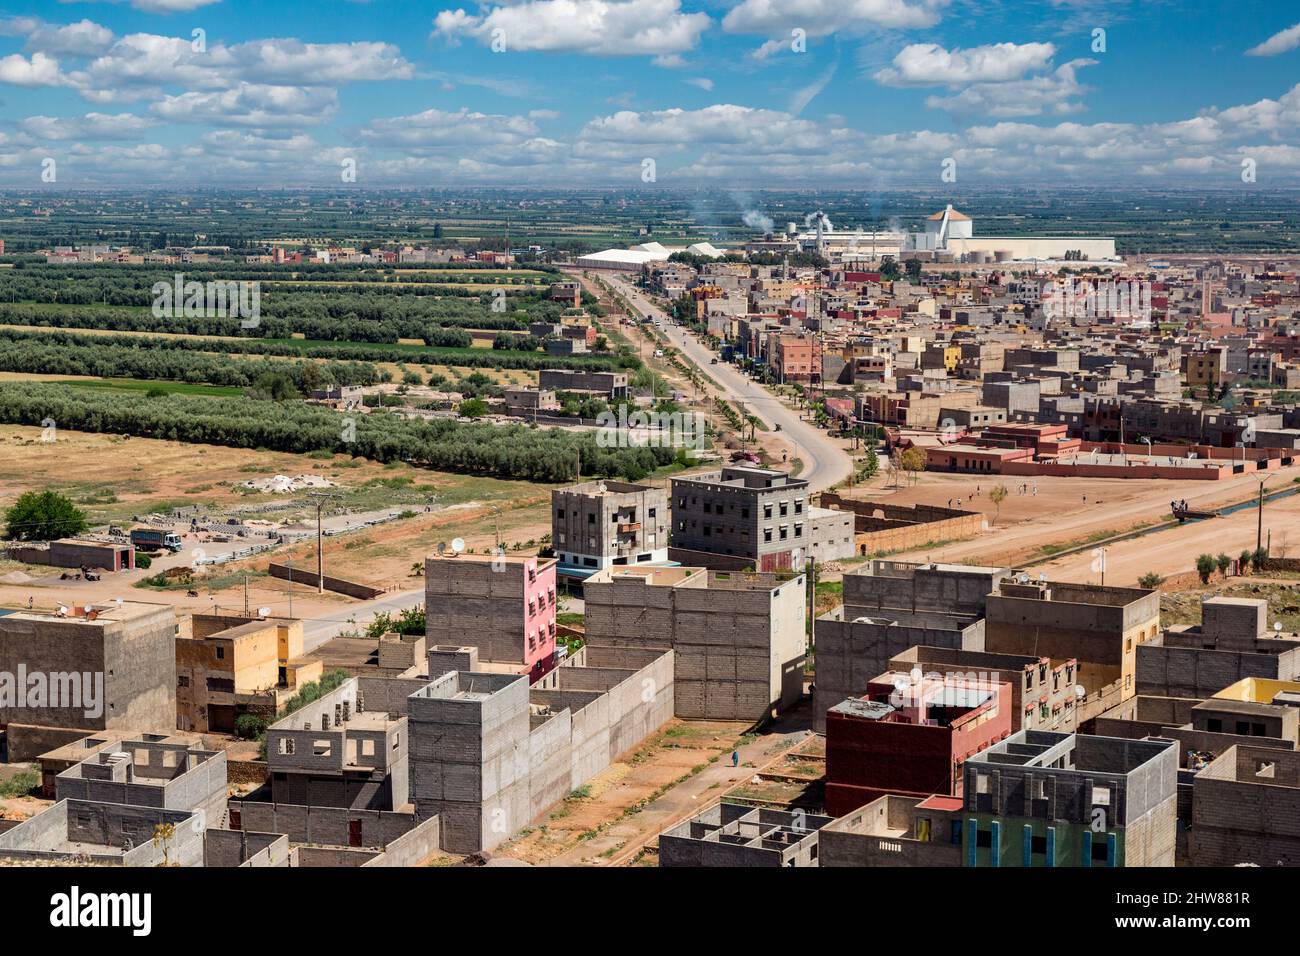 Ouled Ayad, Morocco.  Urban Development Surrounded by Agricultural Fields. Stock Photo